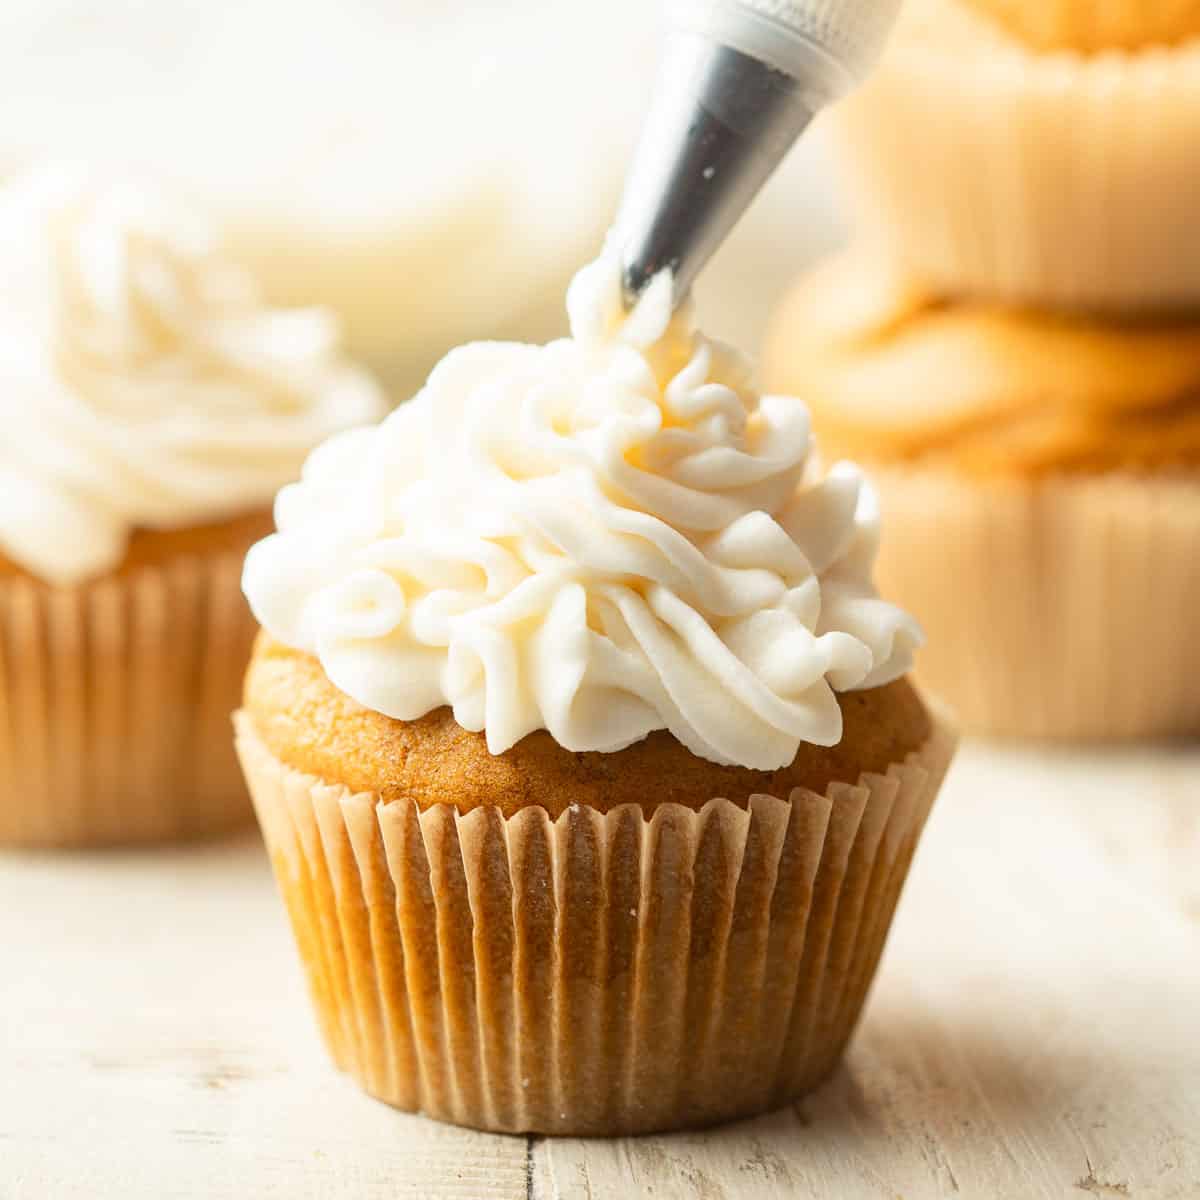 Vegan Cream Cheese Frosting being piped onto a pumpkin cupcake.